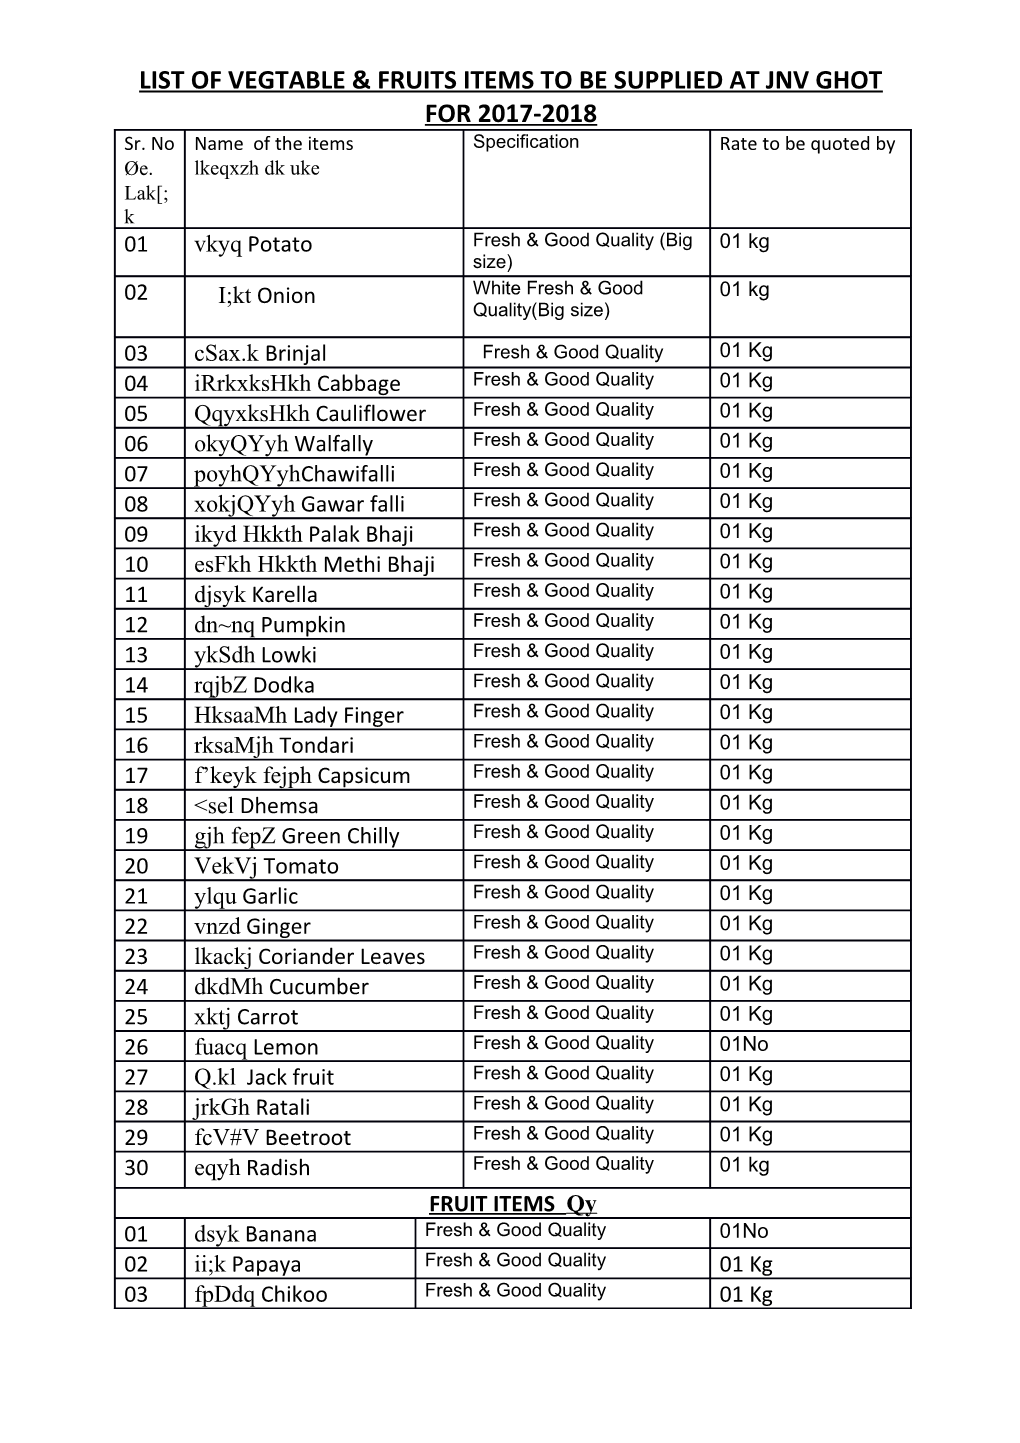 List of Vegtable & Fruits Items to Be Supplied at Jnv Ghot for 2017-2018